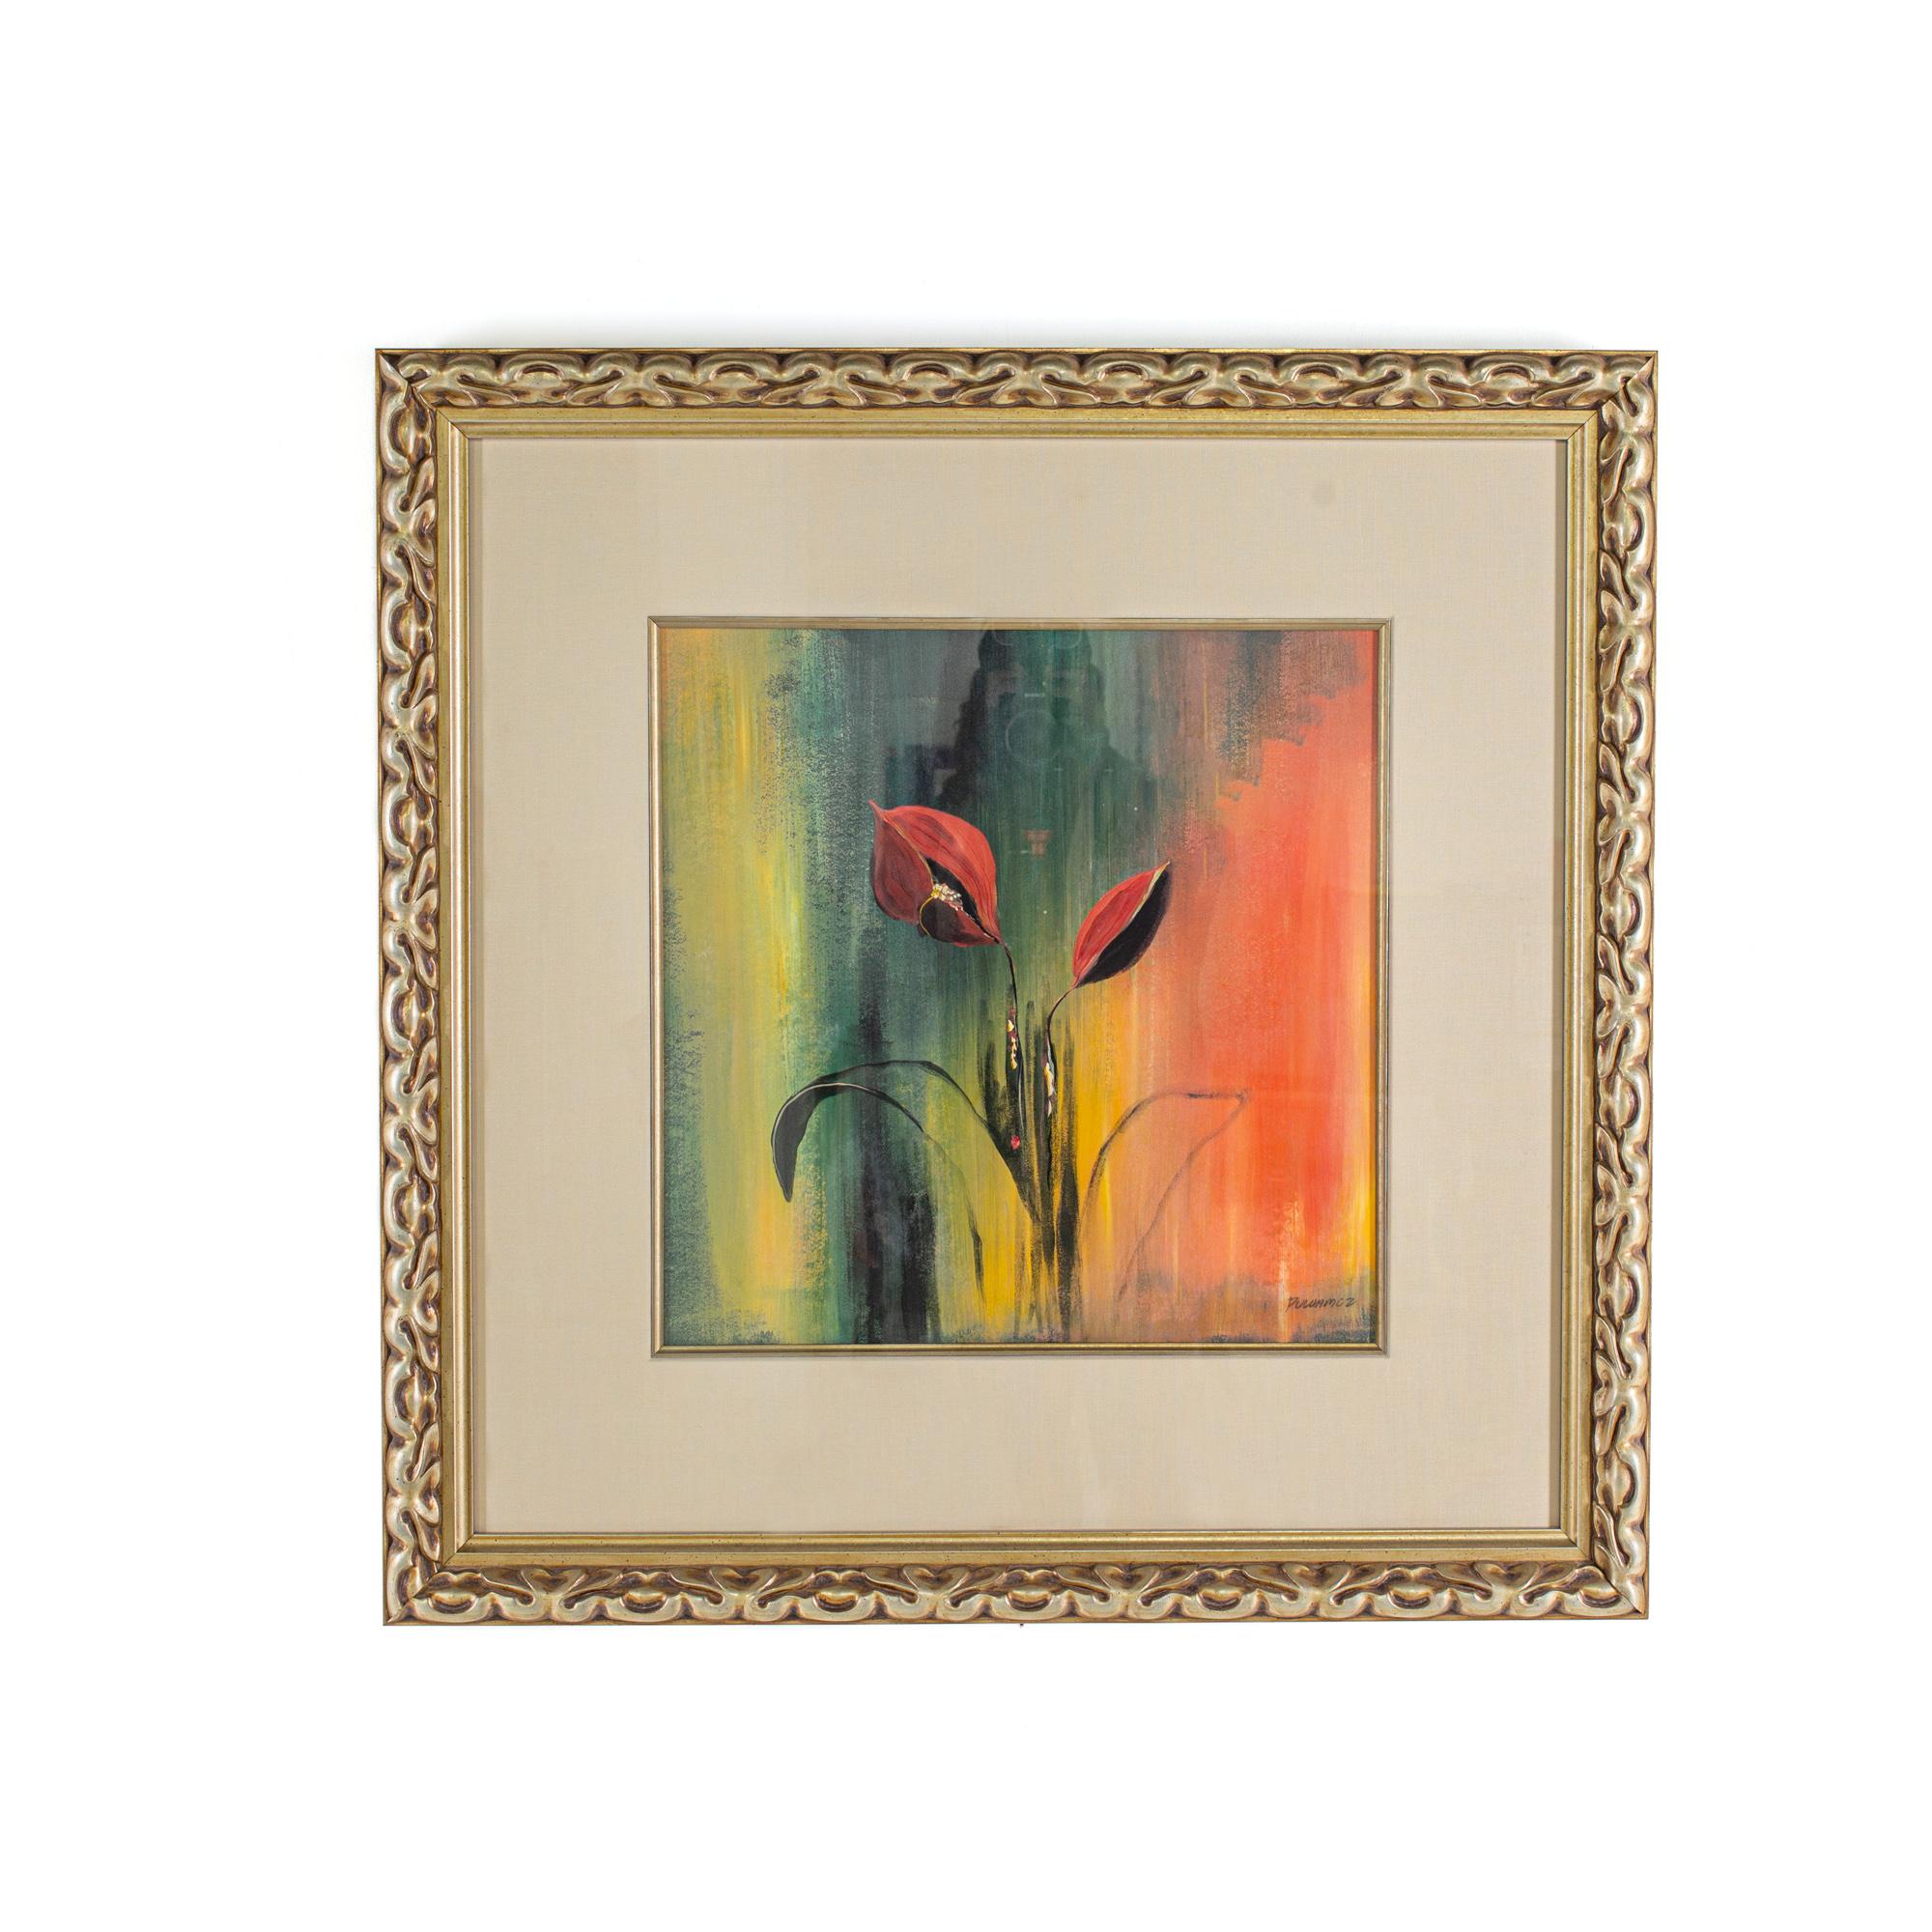 Puwamoz framed pair of flowers painting. 

This painting measures: 34 wide x 1.75 deep x 34 inches high.

This painting is in great Vintage condition with minor marks, dents, and wear.

We take our photos in a controlled lighting studio to